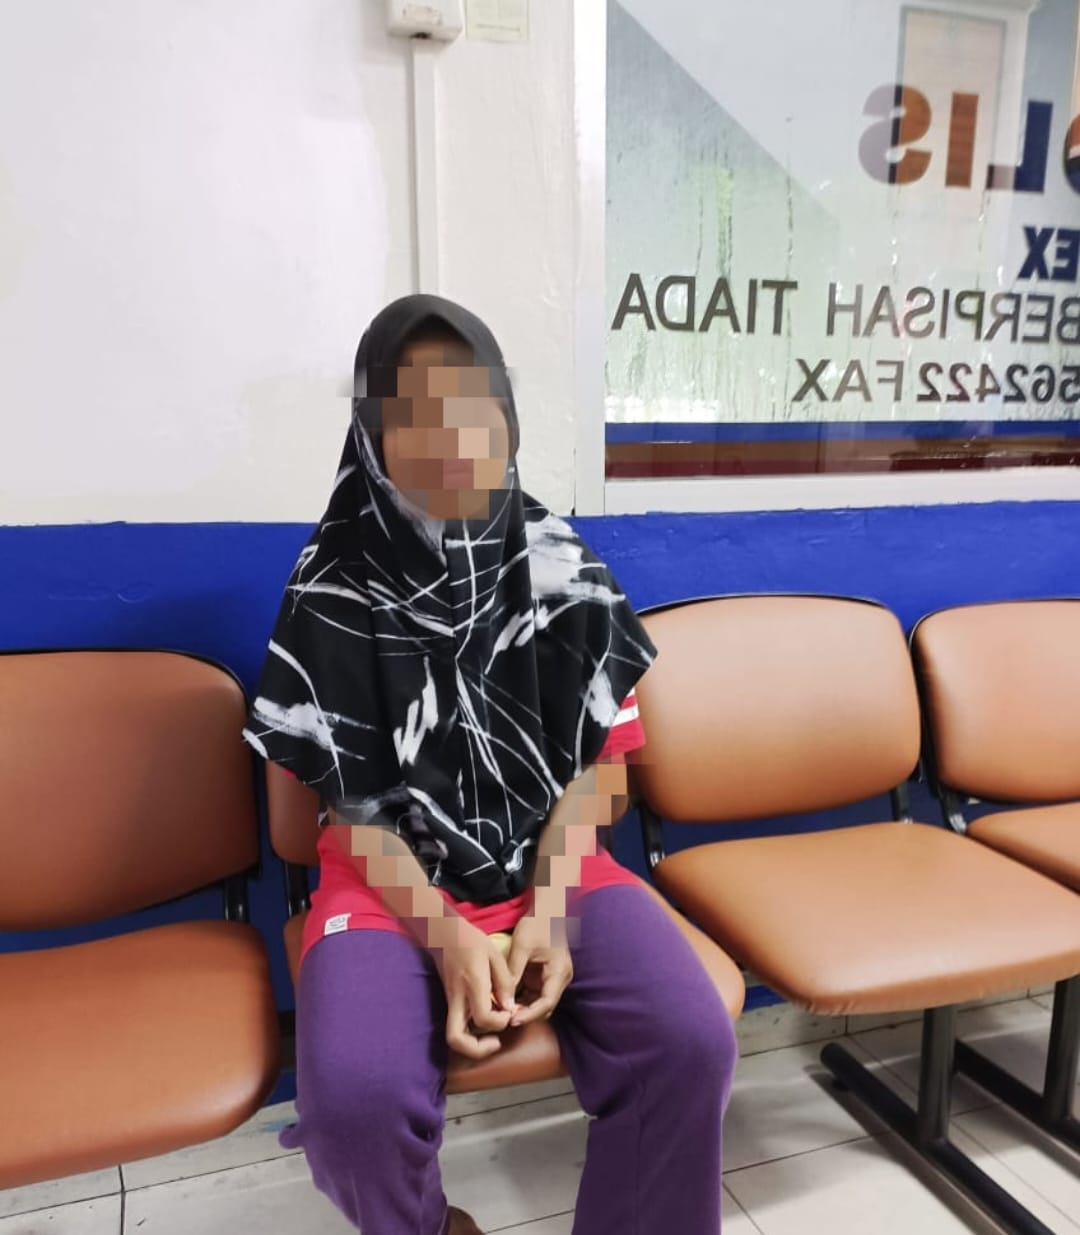 M'sian mother abandons 11yo daughter after her third husband refuses to take care of her | weirdkaya